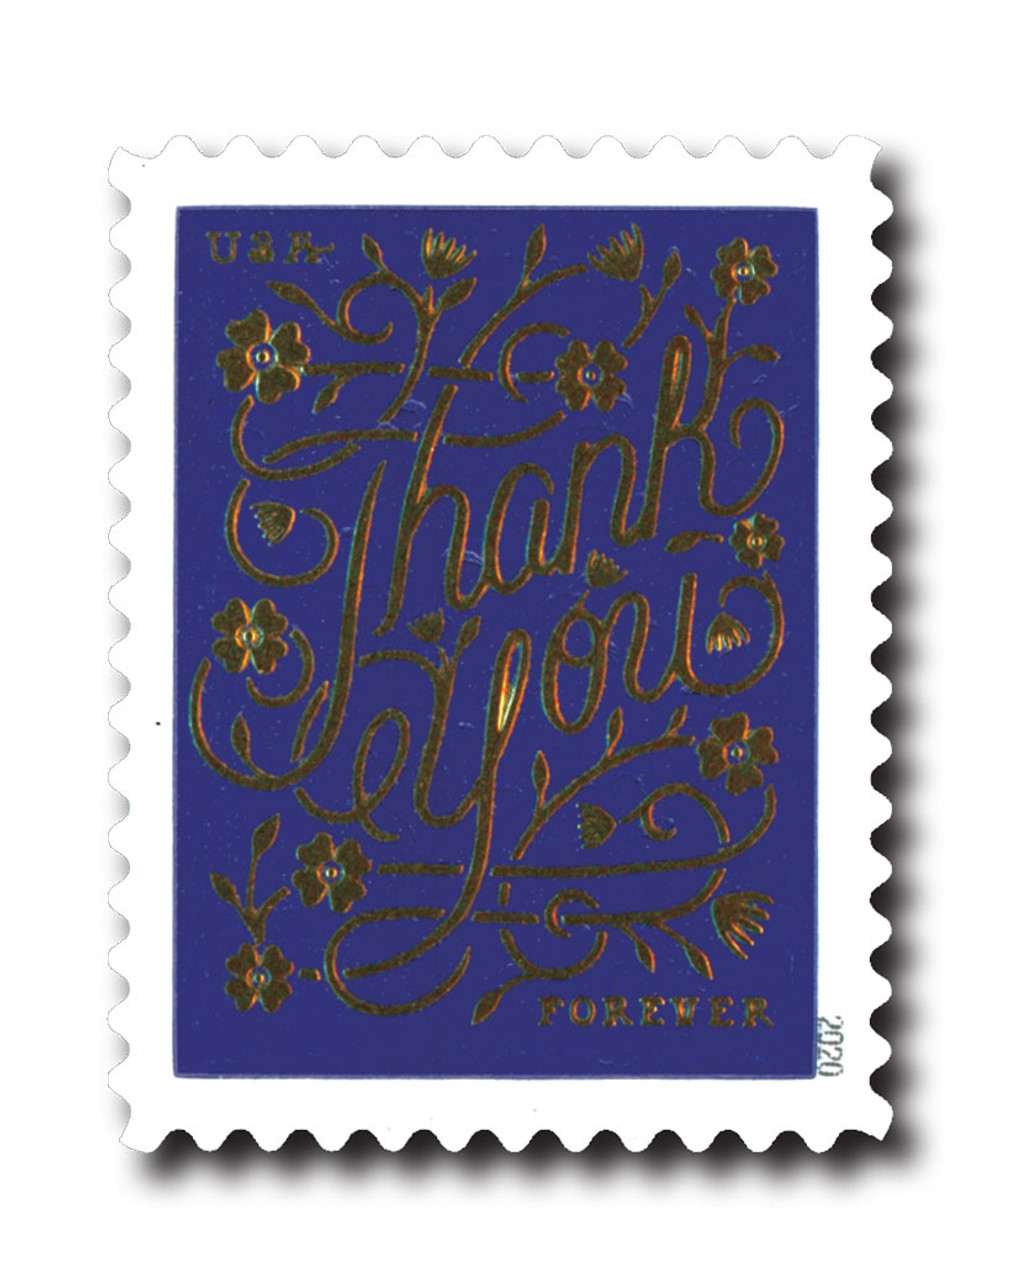 5522 - 2020 First-Class Forever Stamps - Thank You: Violet Background -  Mystic Stamp Company